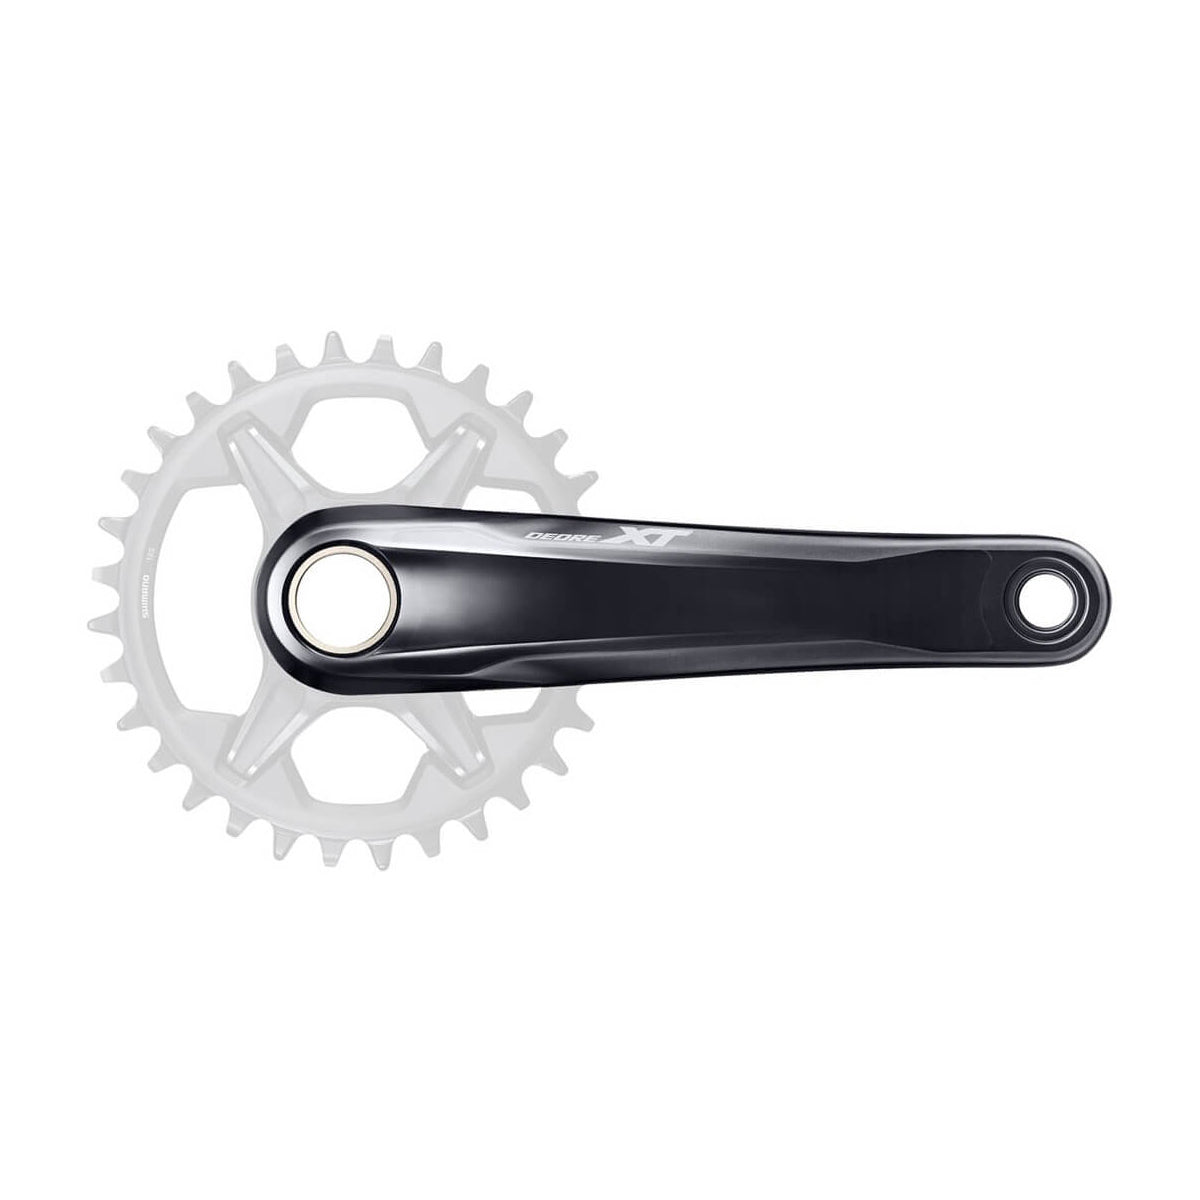 XT FCM8100 1x12 Speed Crank Arms 24mm Direct Mount No Spider No Chainring 52mm Chainline Black170mm